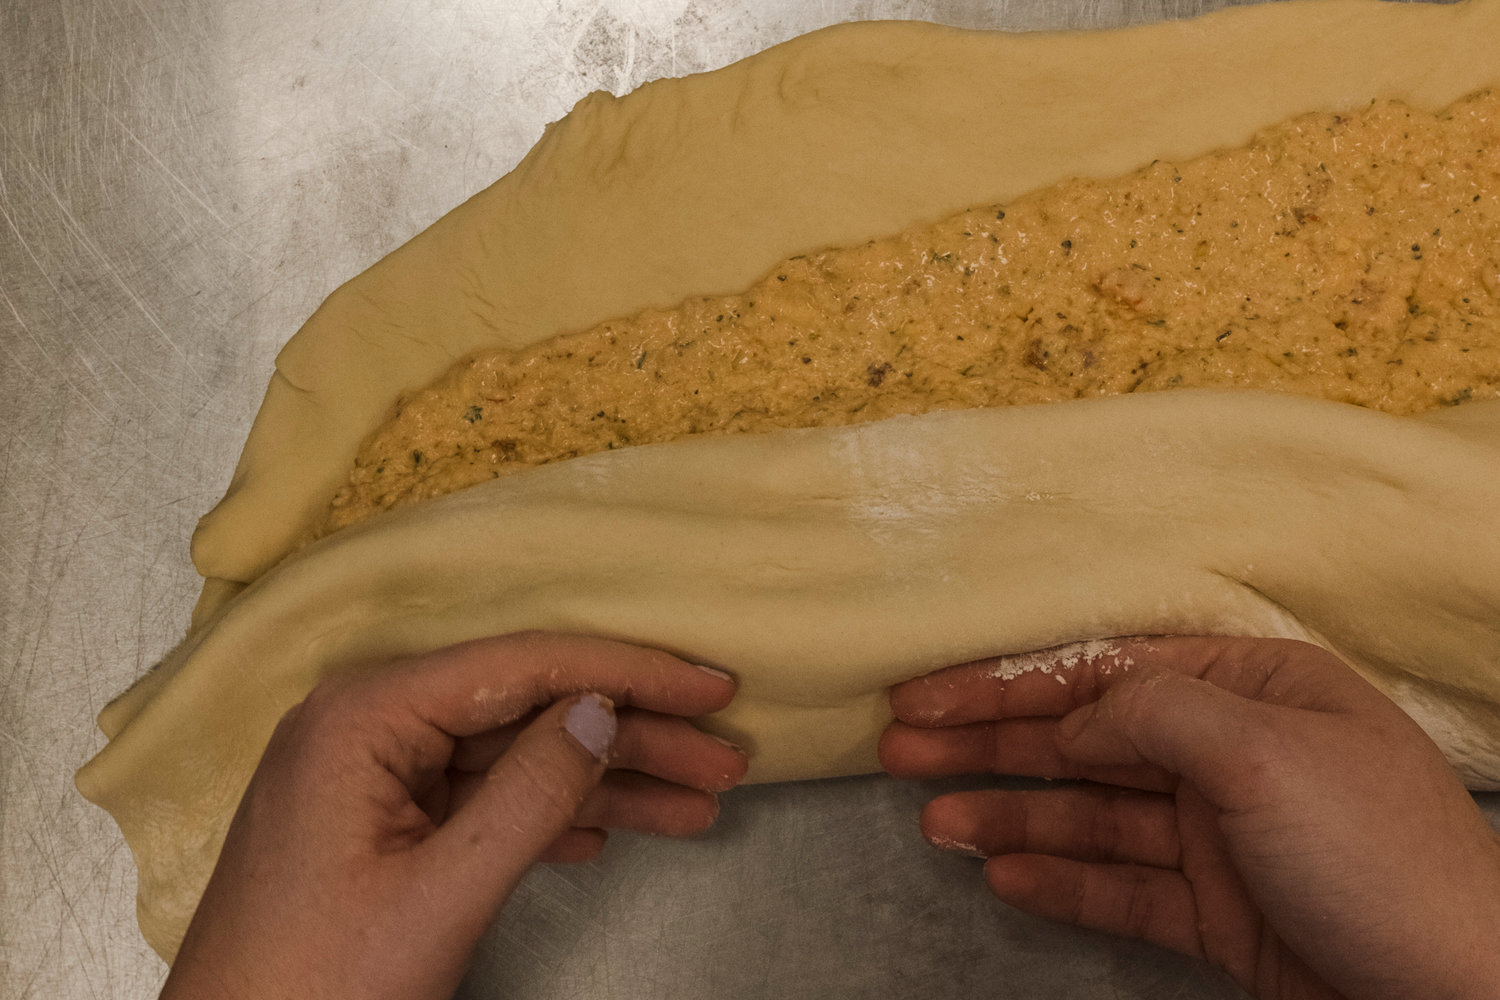 The crawfish king cake starts with freshly made dough that is spread with the crawfish filling. It is then rolled up and baked to golden perfection.